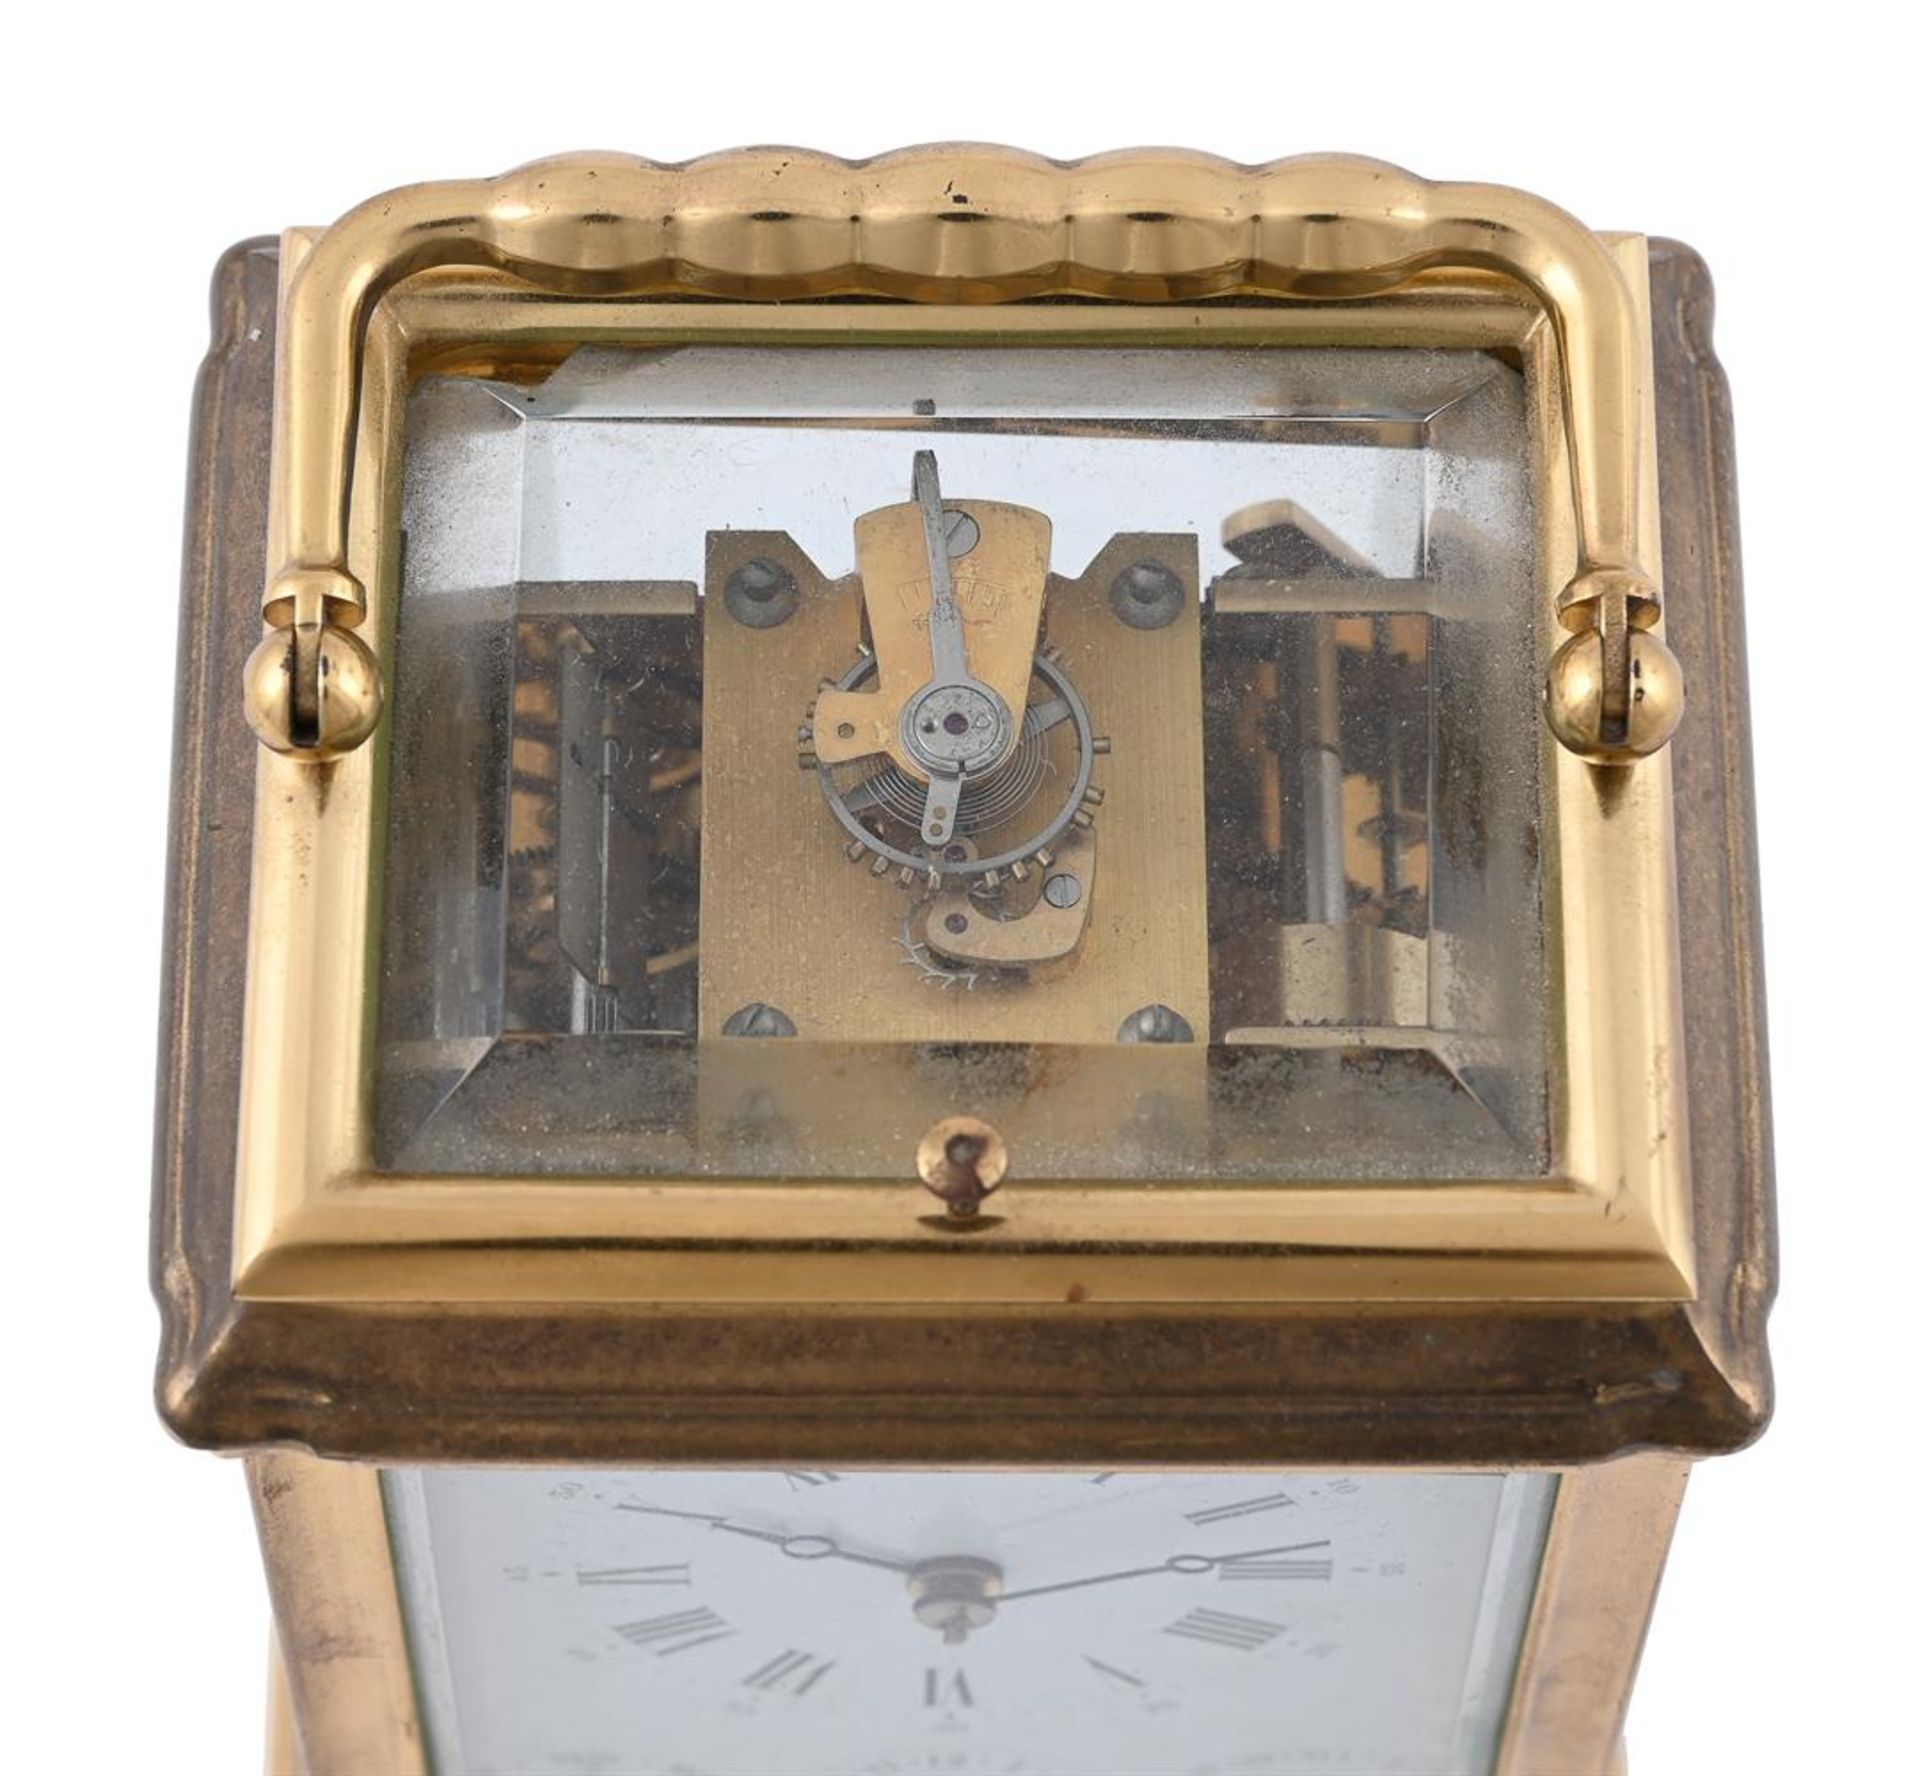 A FRENCH/SWISS LAQUERED BRASS GORGE CASED CALENDAR CARRIAGE CLOCK WITH PUSH-BUTTON REPEAT AND ALARM - Image 3 of 3